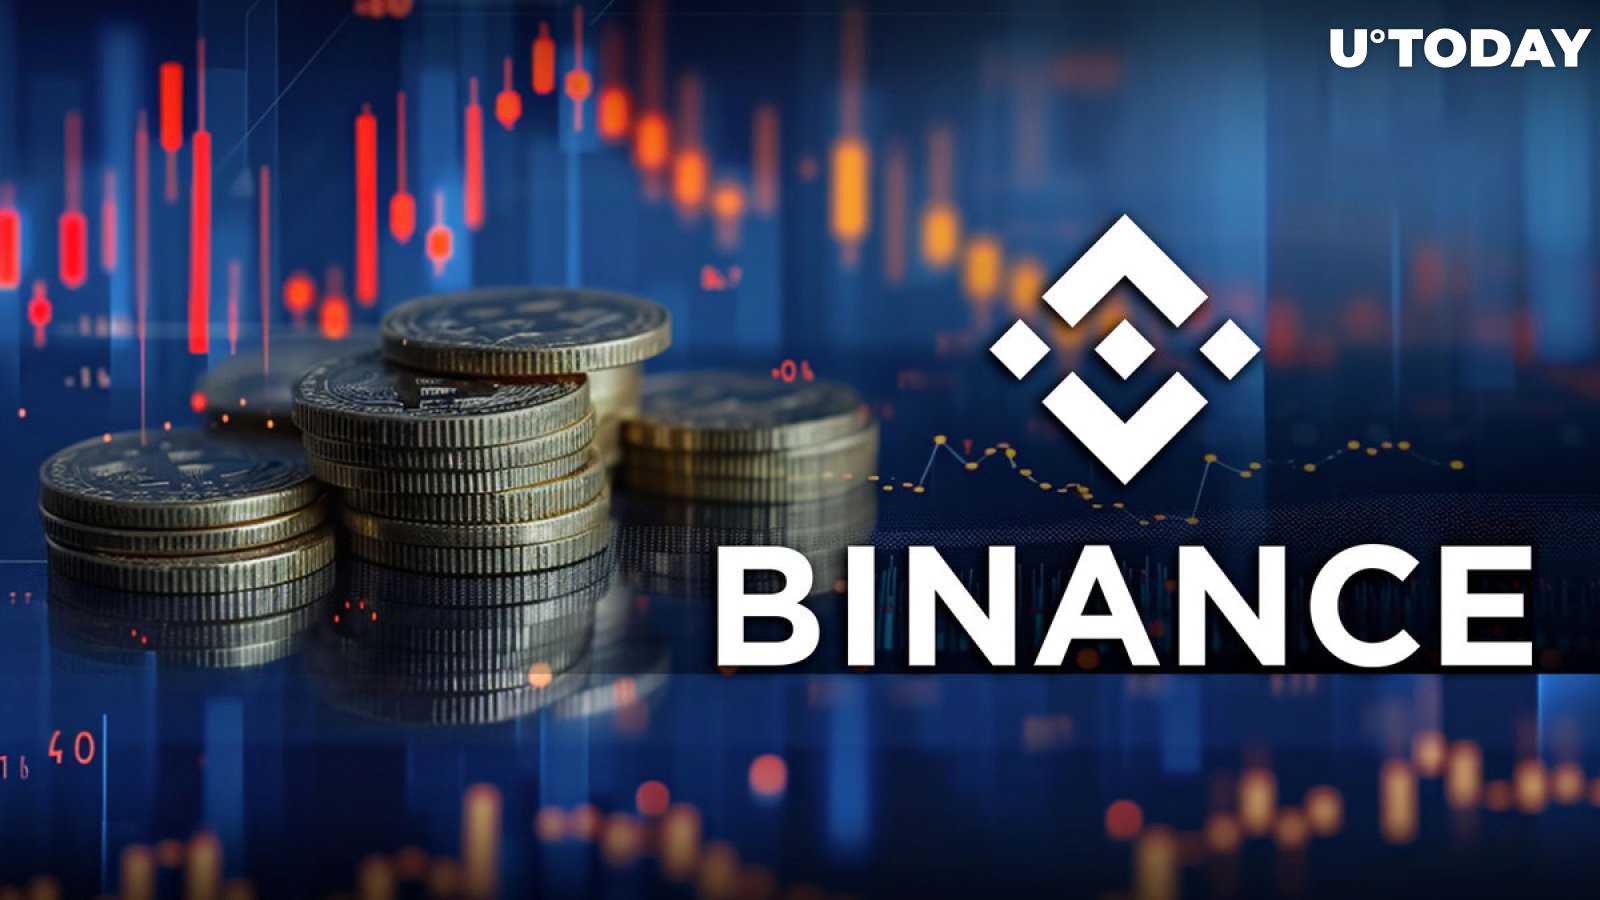 Binance to delist 6 major trading pairs: details